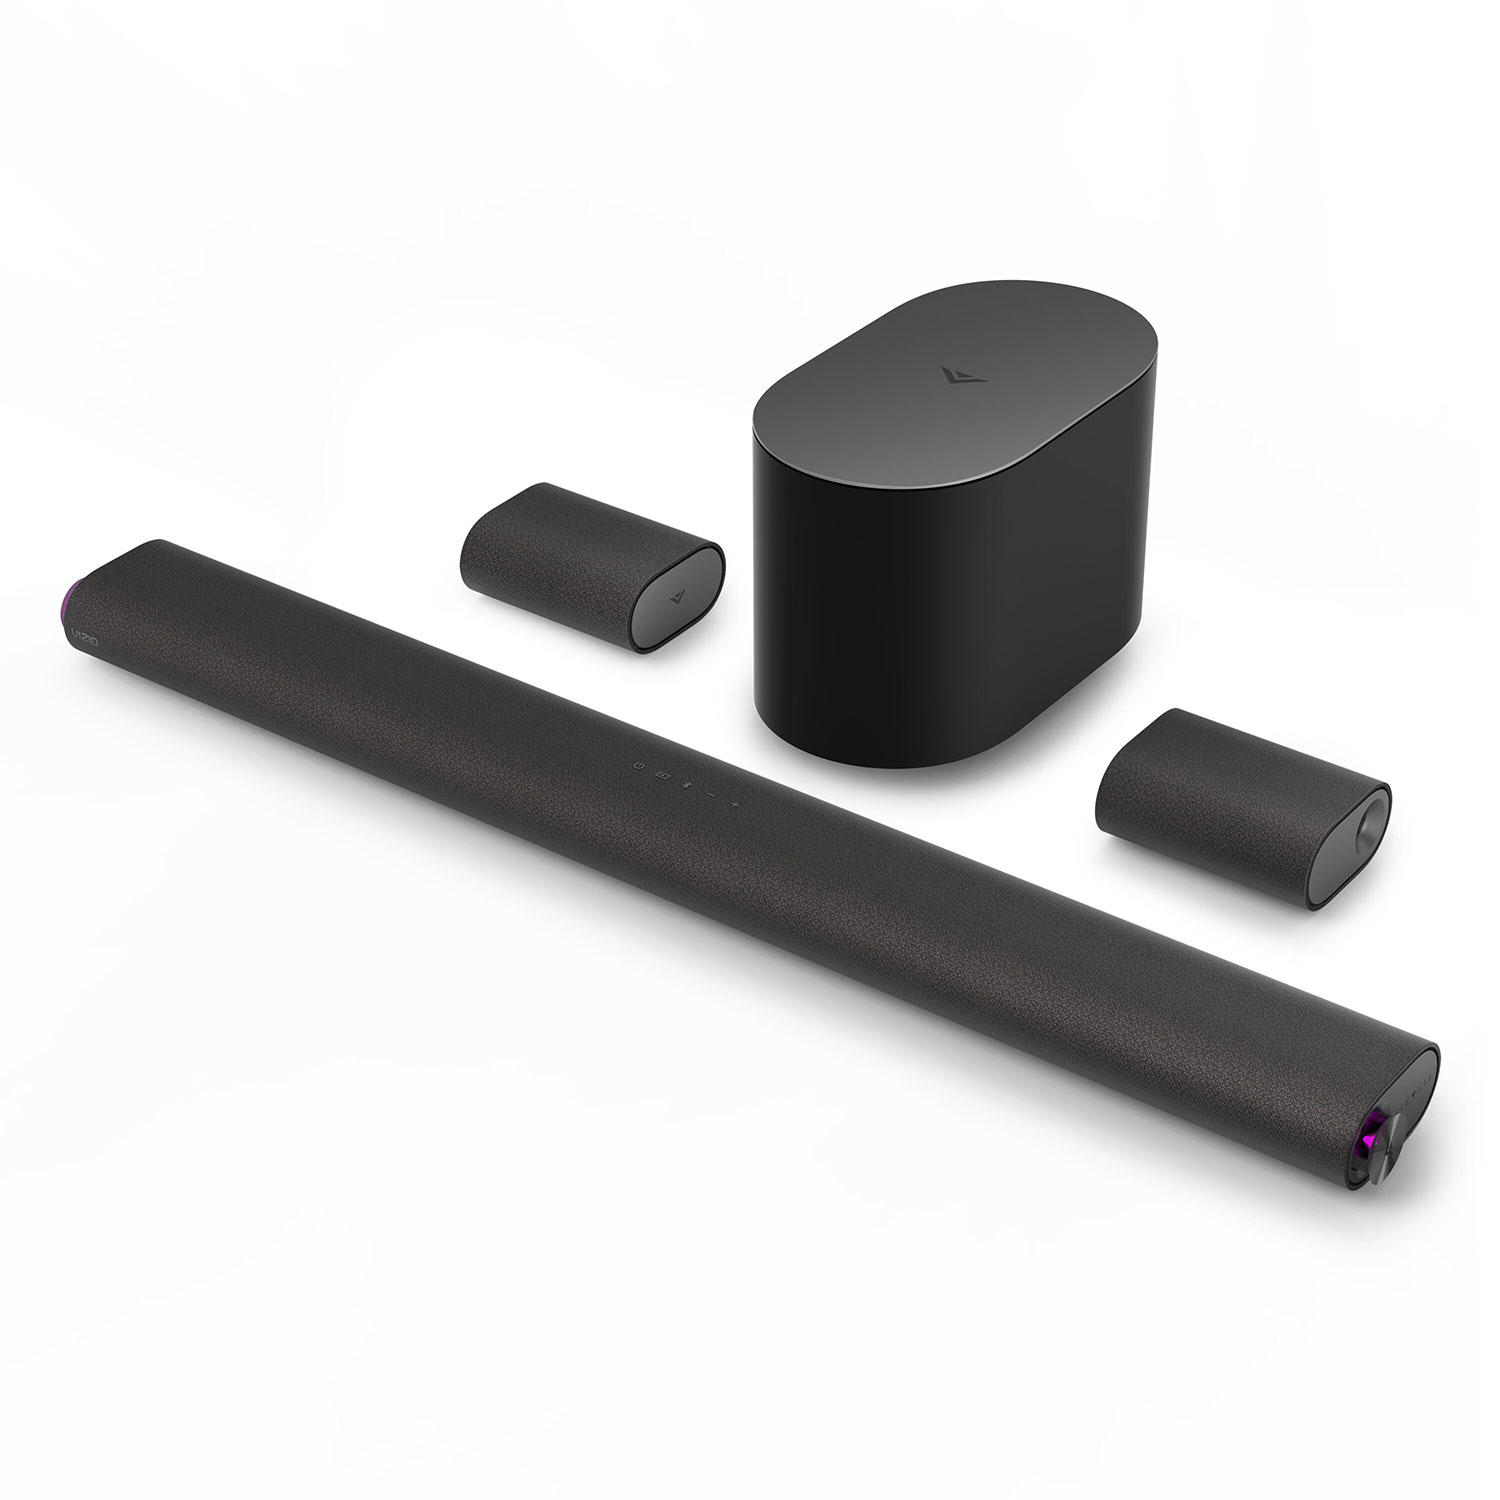 VIZIO M-Series Elevate 5.1.2 Immersive Sound Bar with Dolby Atmos, DTS:X and Wireless Subwoofer - M512e-K6